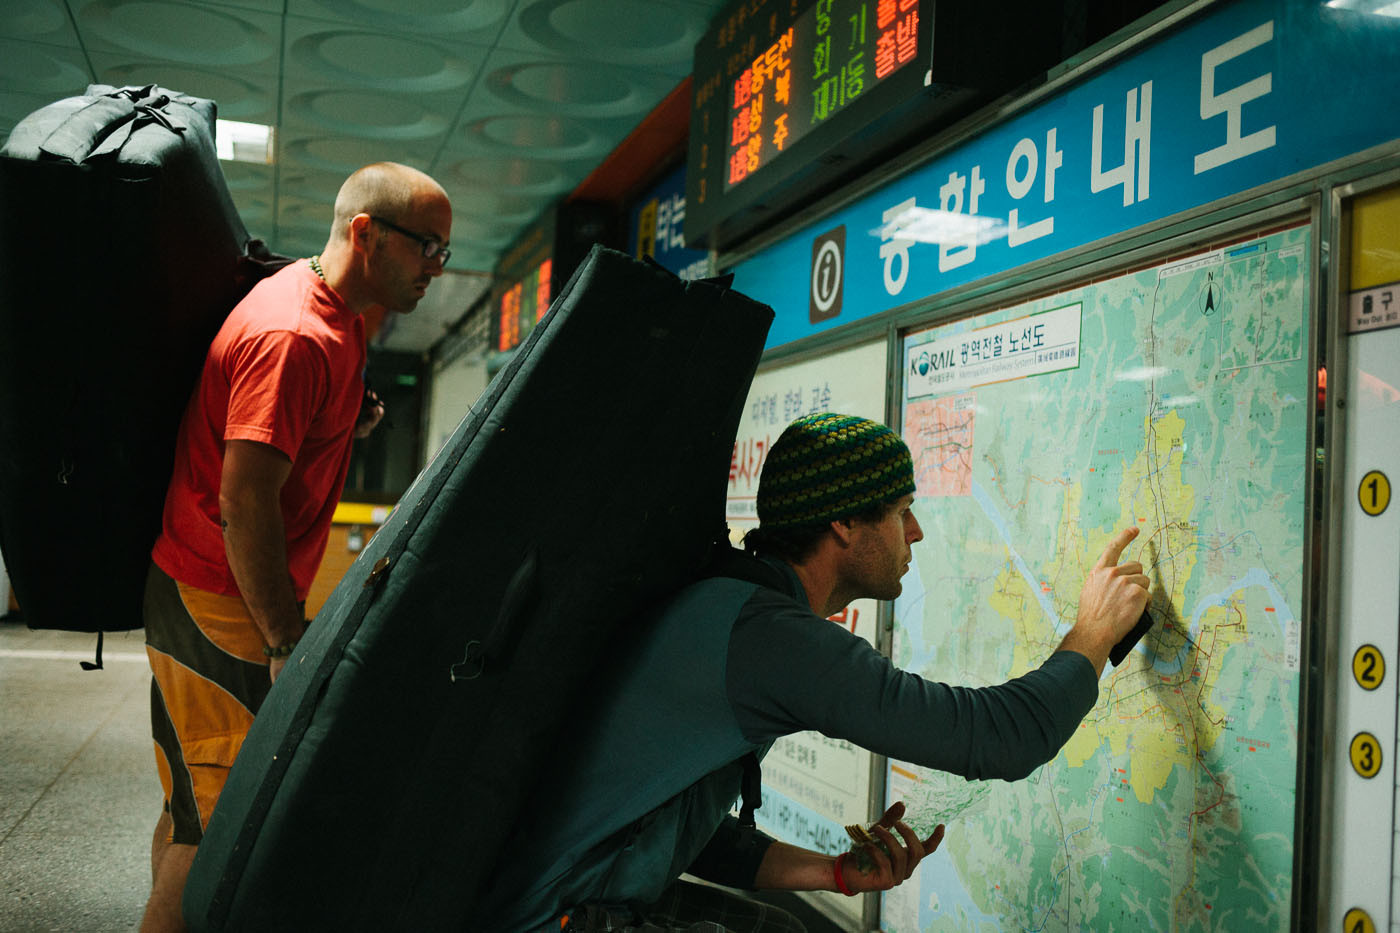 Paul Lammens and Dave McAllister check a subway map in Seoul, South Korea